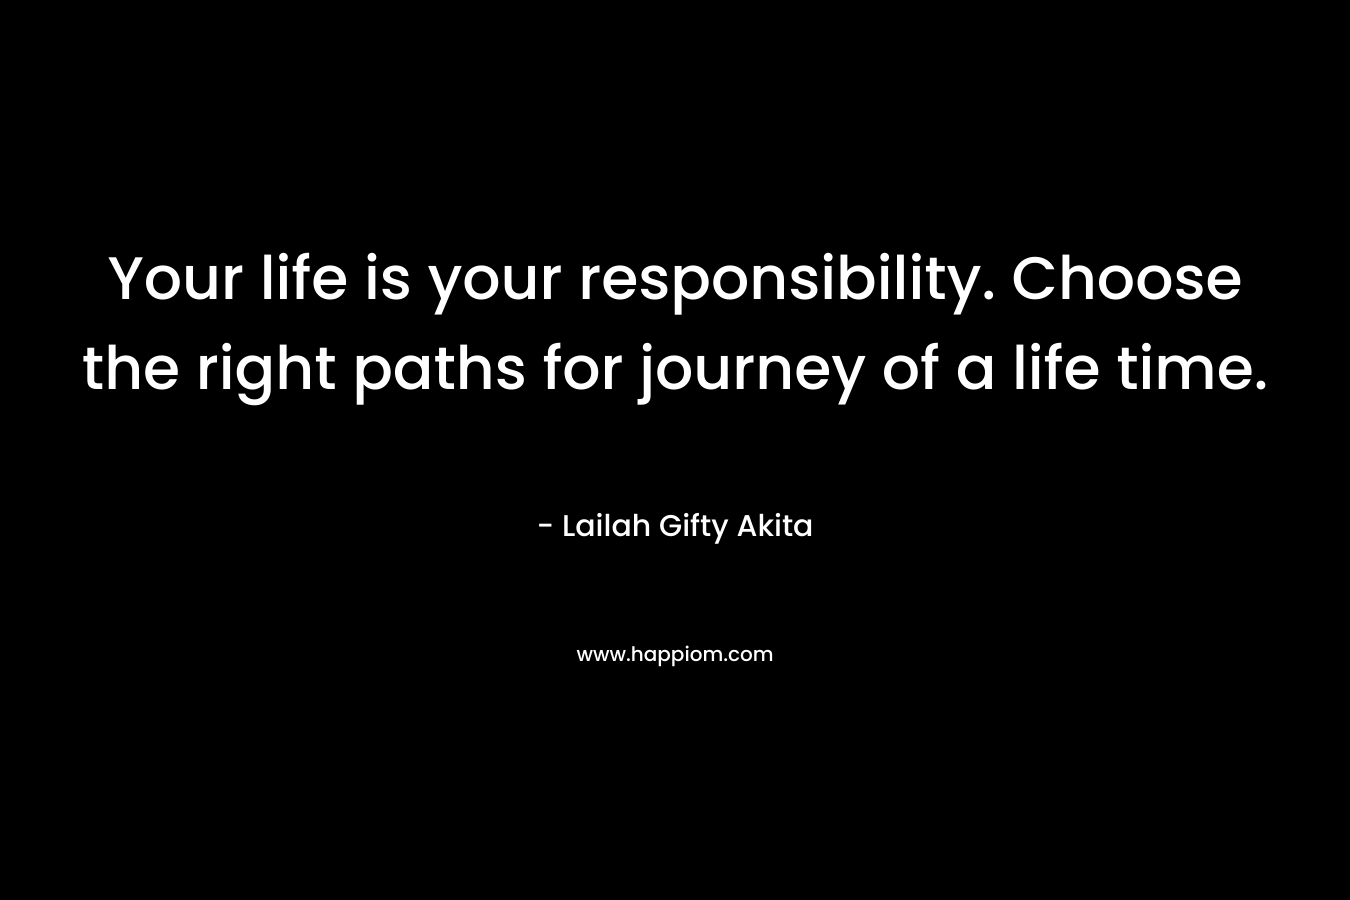 Your life is your responsibility. Choose the right paths for journey of a life time.